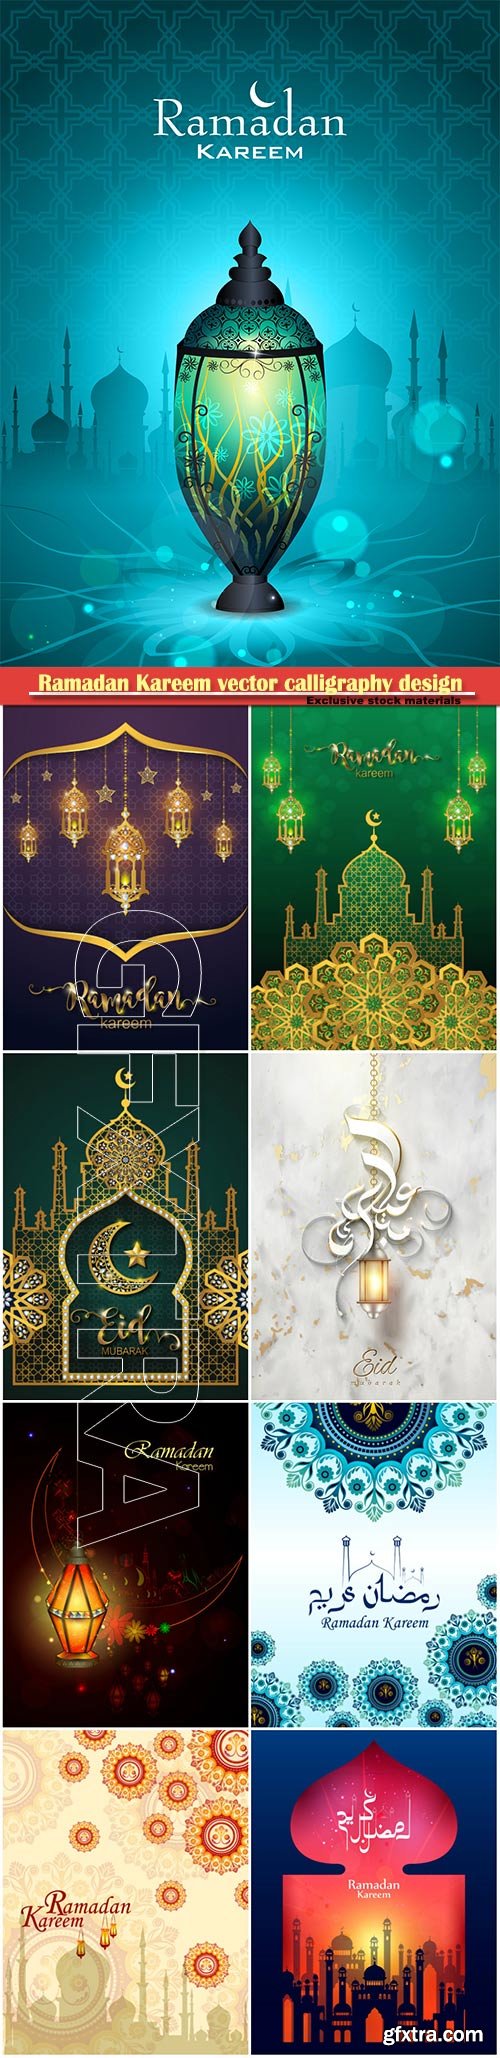 Ramadan Kareem vector calligraphy design with decorative floral pattern, mosque silhouette, crescent and glittering islamic background # 53